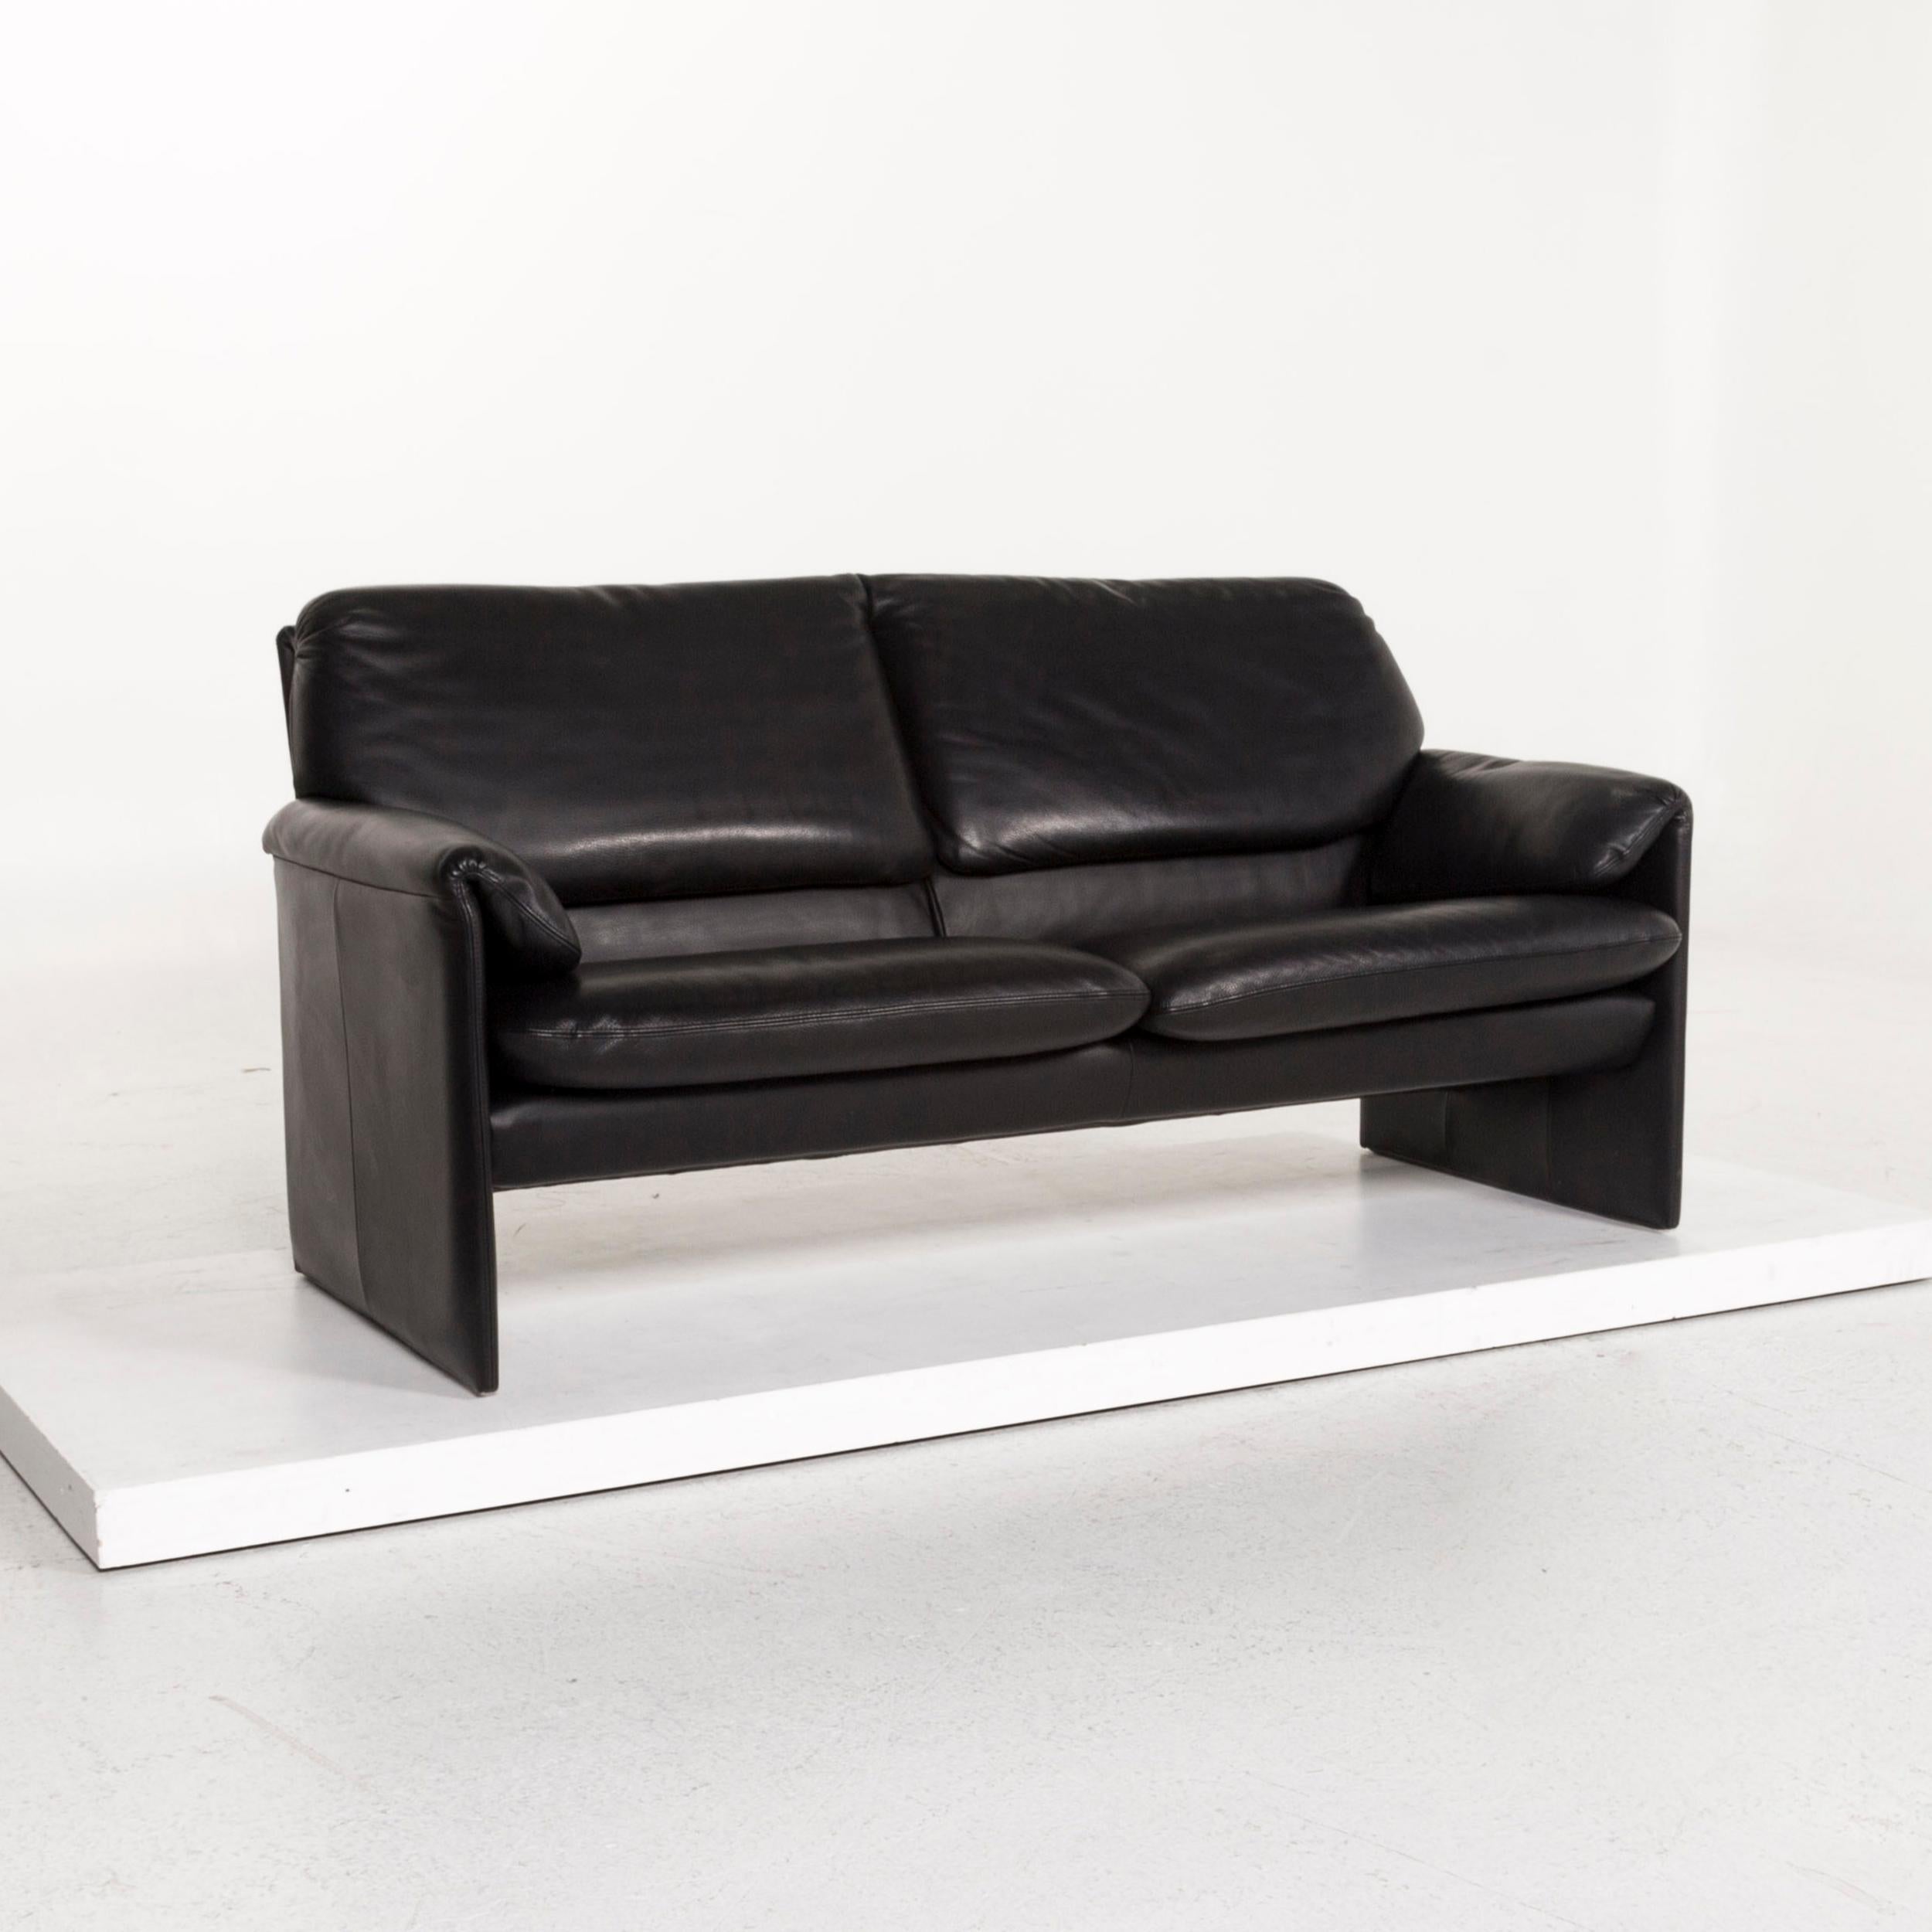 Leolux Leather Sofa Black Two-Seat Couch In Good Condition For Sale In Cologne, DE